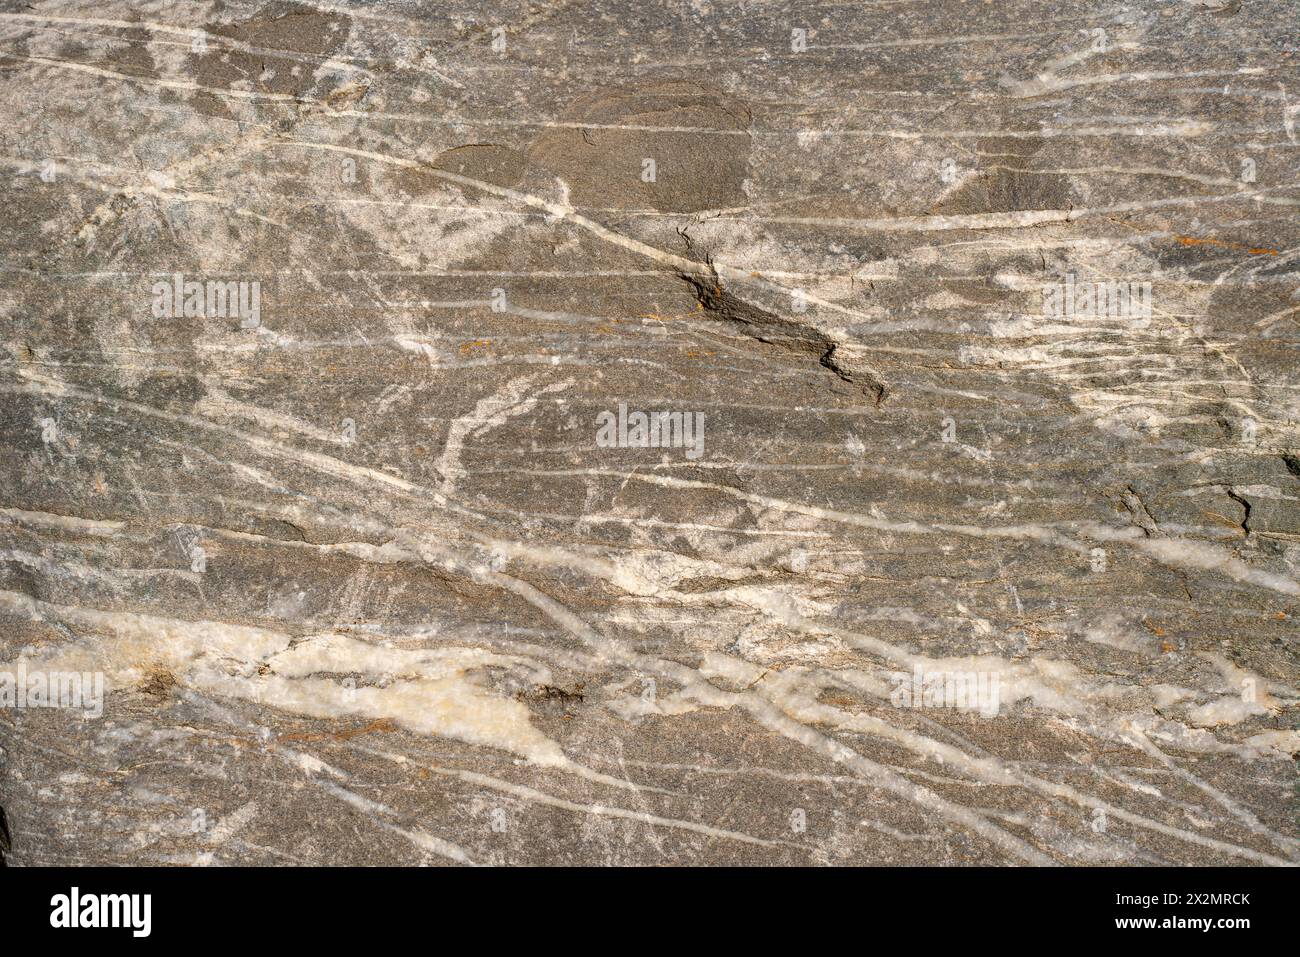 Texture of rough natural stone with different colors as a background. Stock Photo